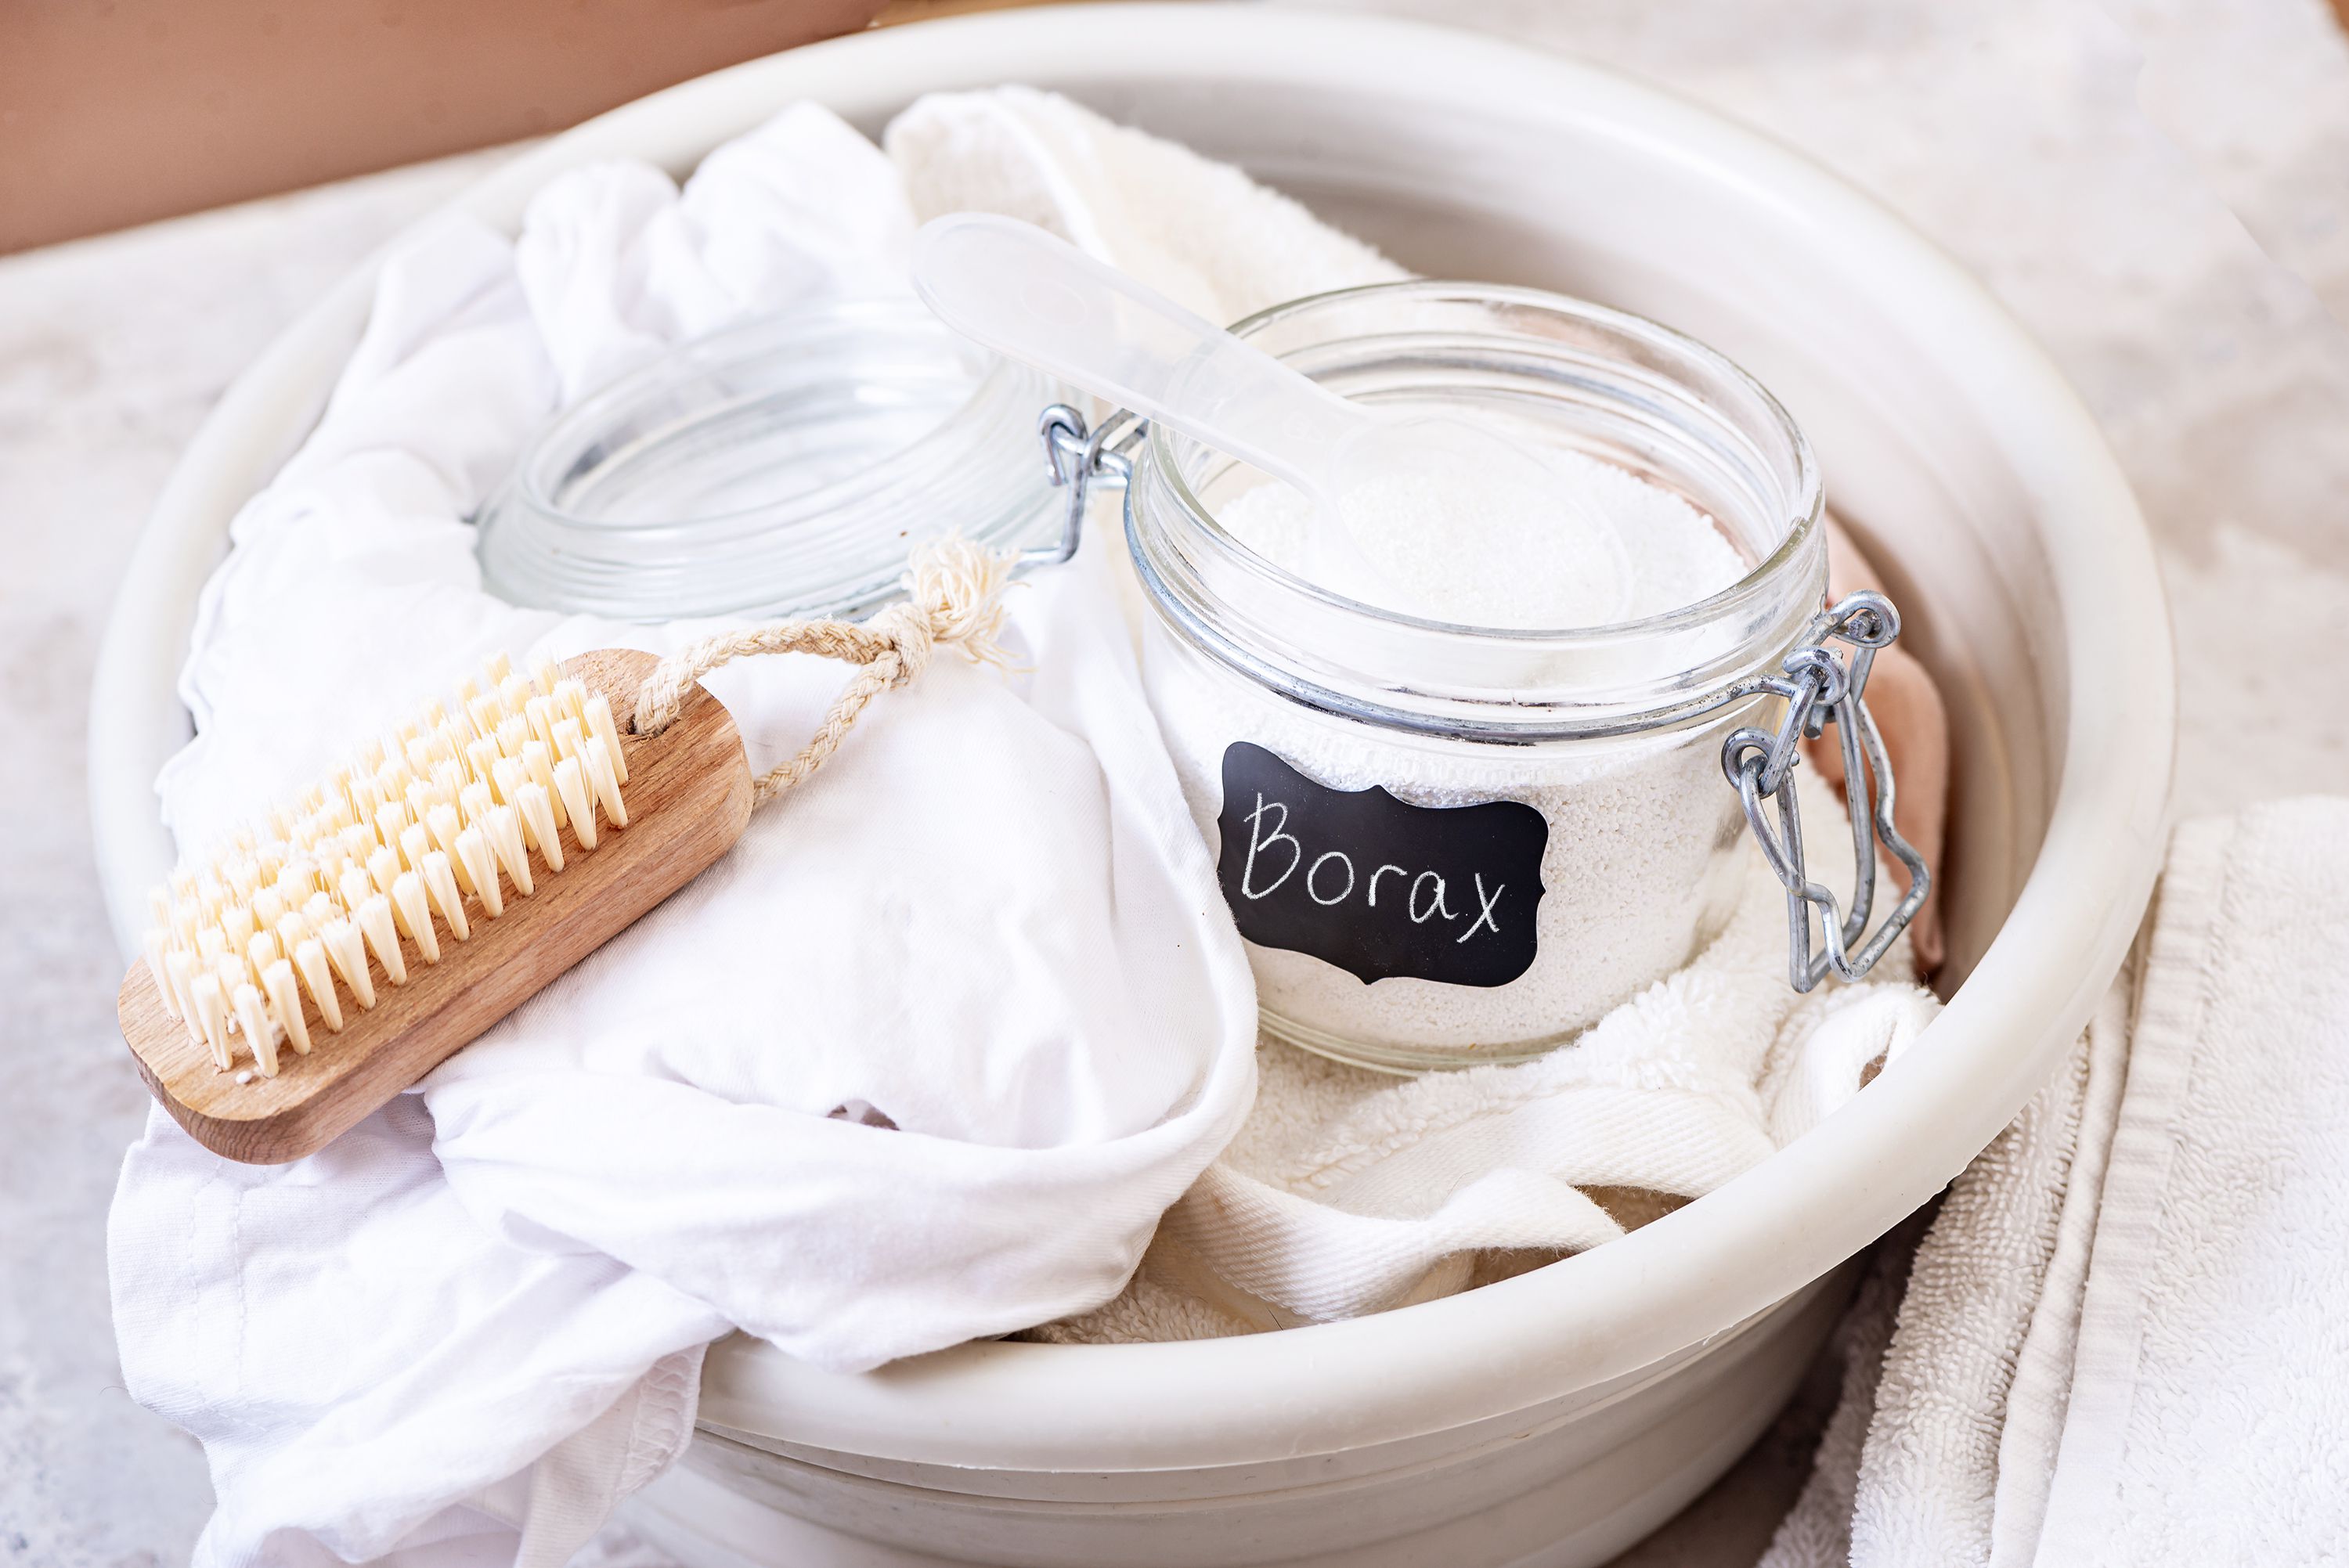 6 Clever and Useful Ways to Use Borax Around the House